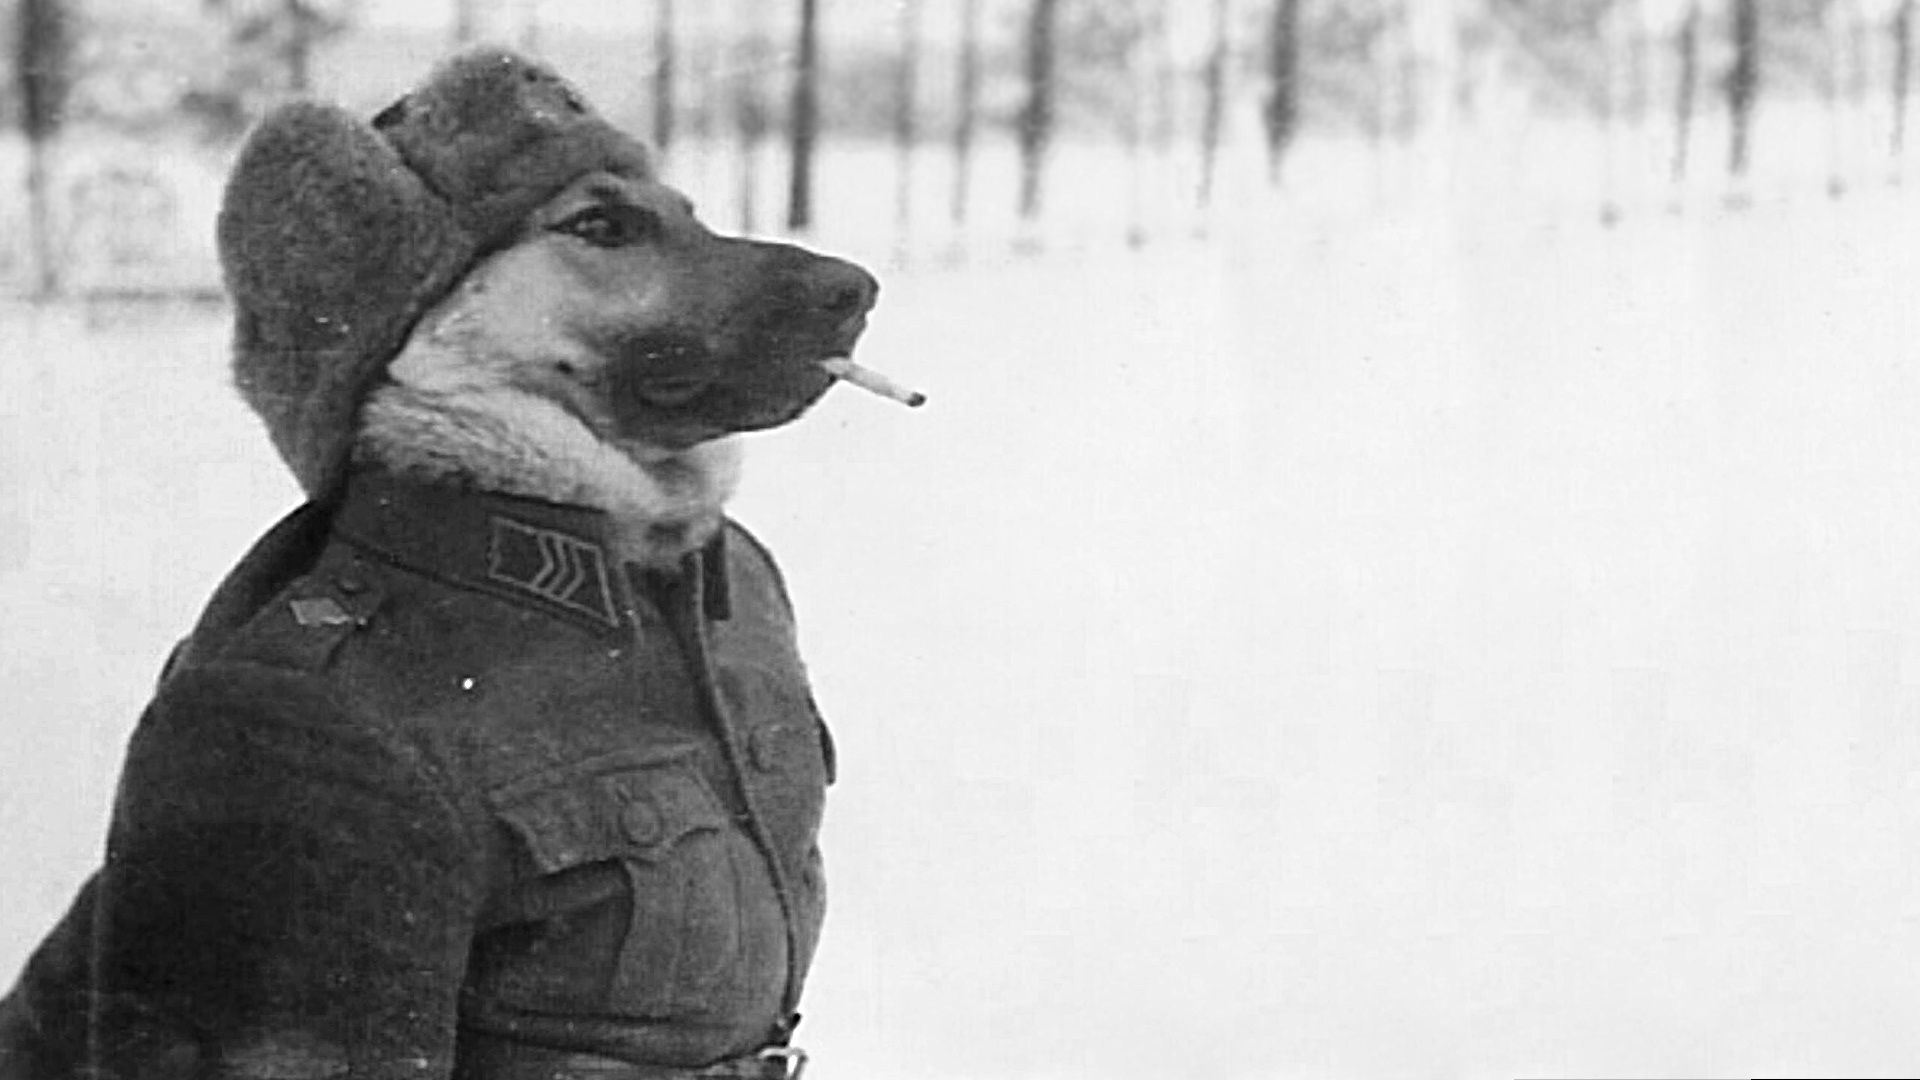 /r/wallpapers Outdoors Face Human Person Snow Portrait - Dog In Uniform Ww2 , HD Wallpaper & Backgrounds